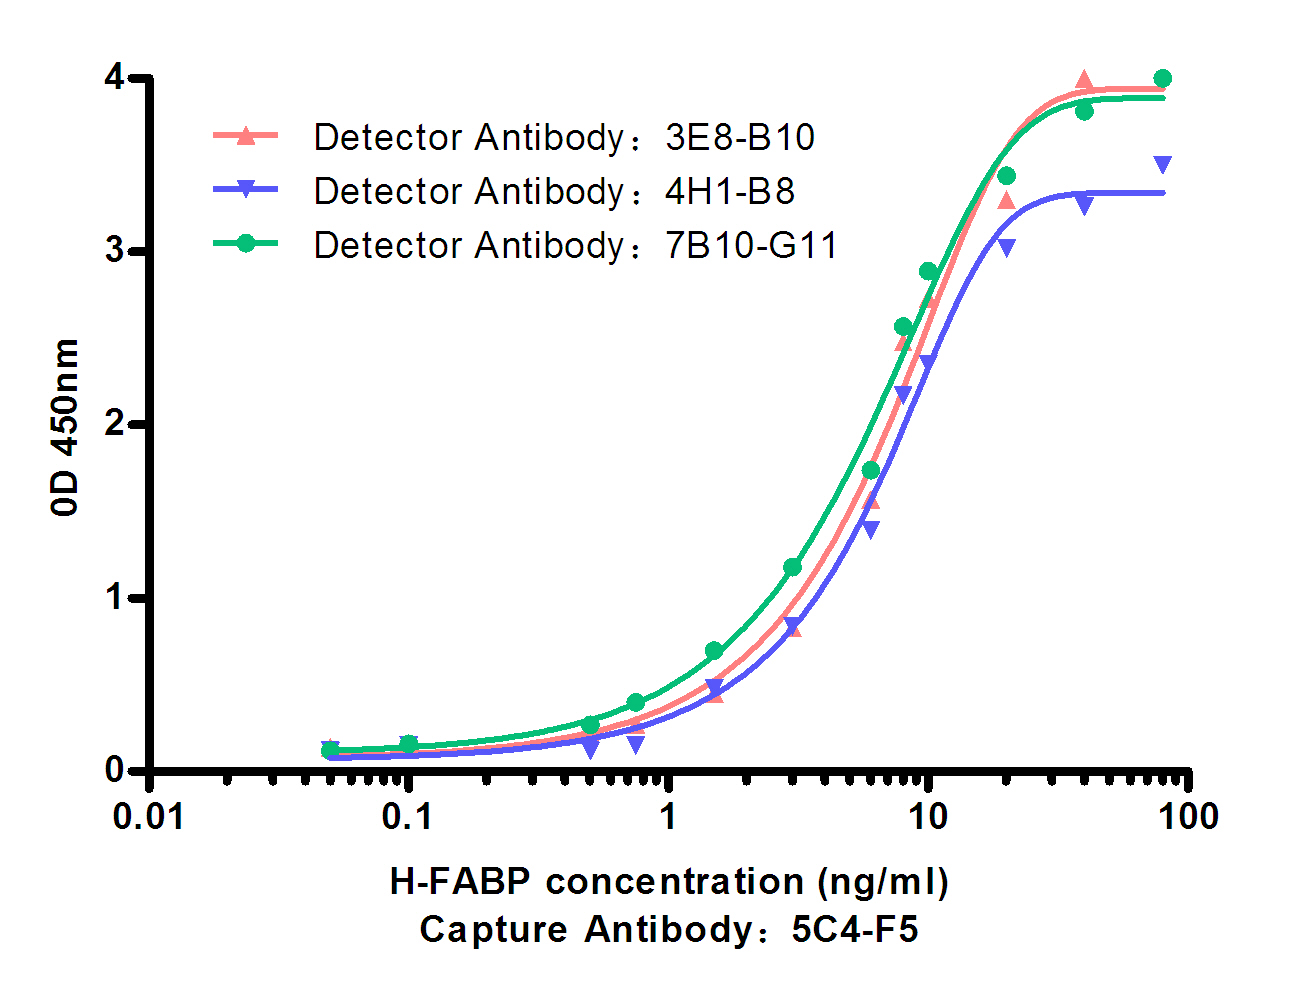 Standard Curve for H-FABP: Capture Antibody Mouse mAb (5C4-F5) to H-FABP at 4u03bcg/ml and Detector Antibody Mouse mAb(3E8-B10u30017B10-G11u30014H1-B8)to H-FABP at 0.08 u03bcg/ml.